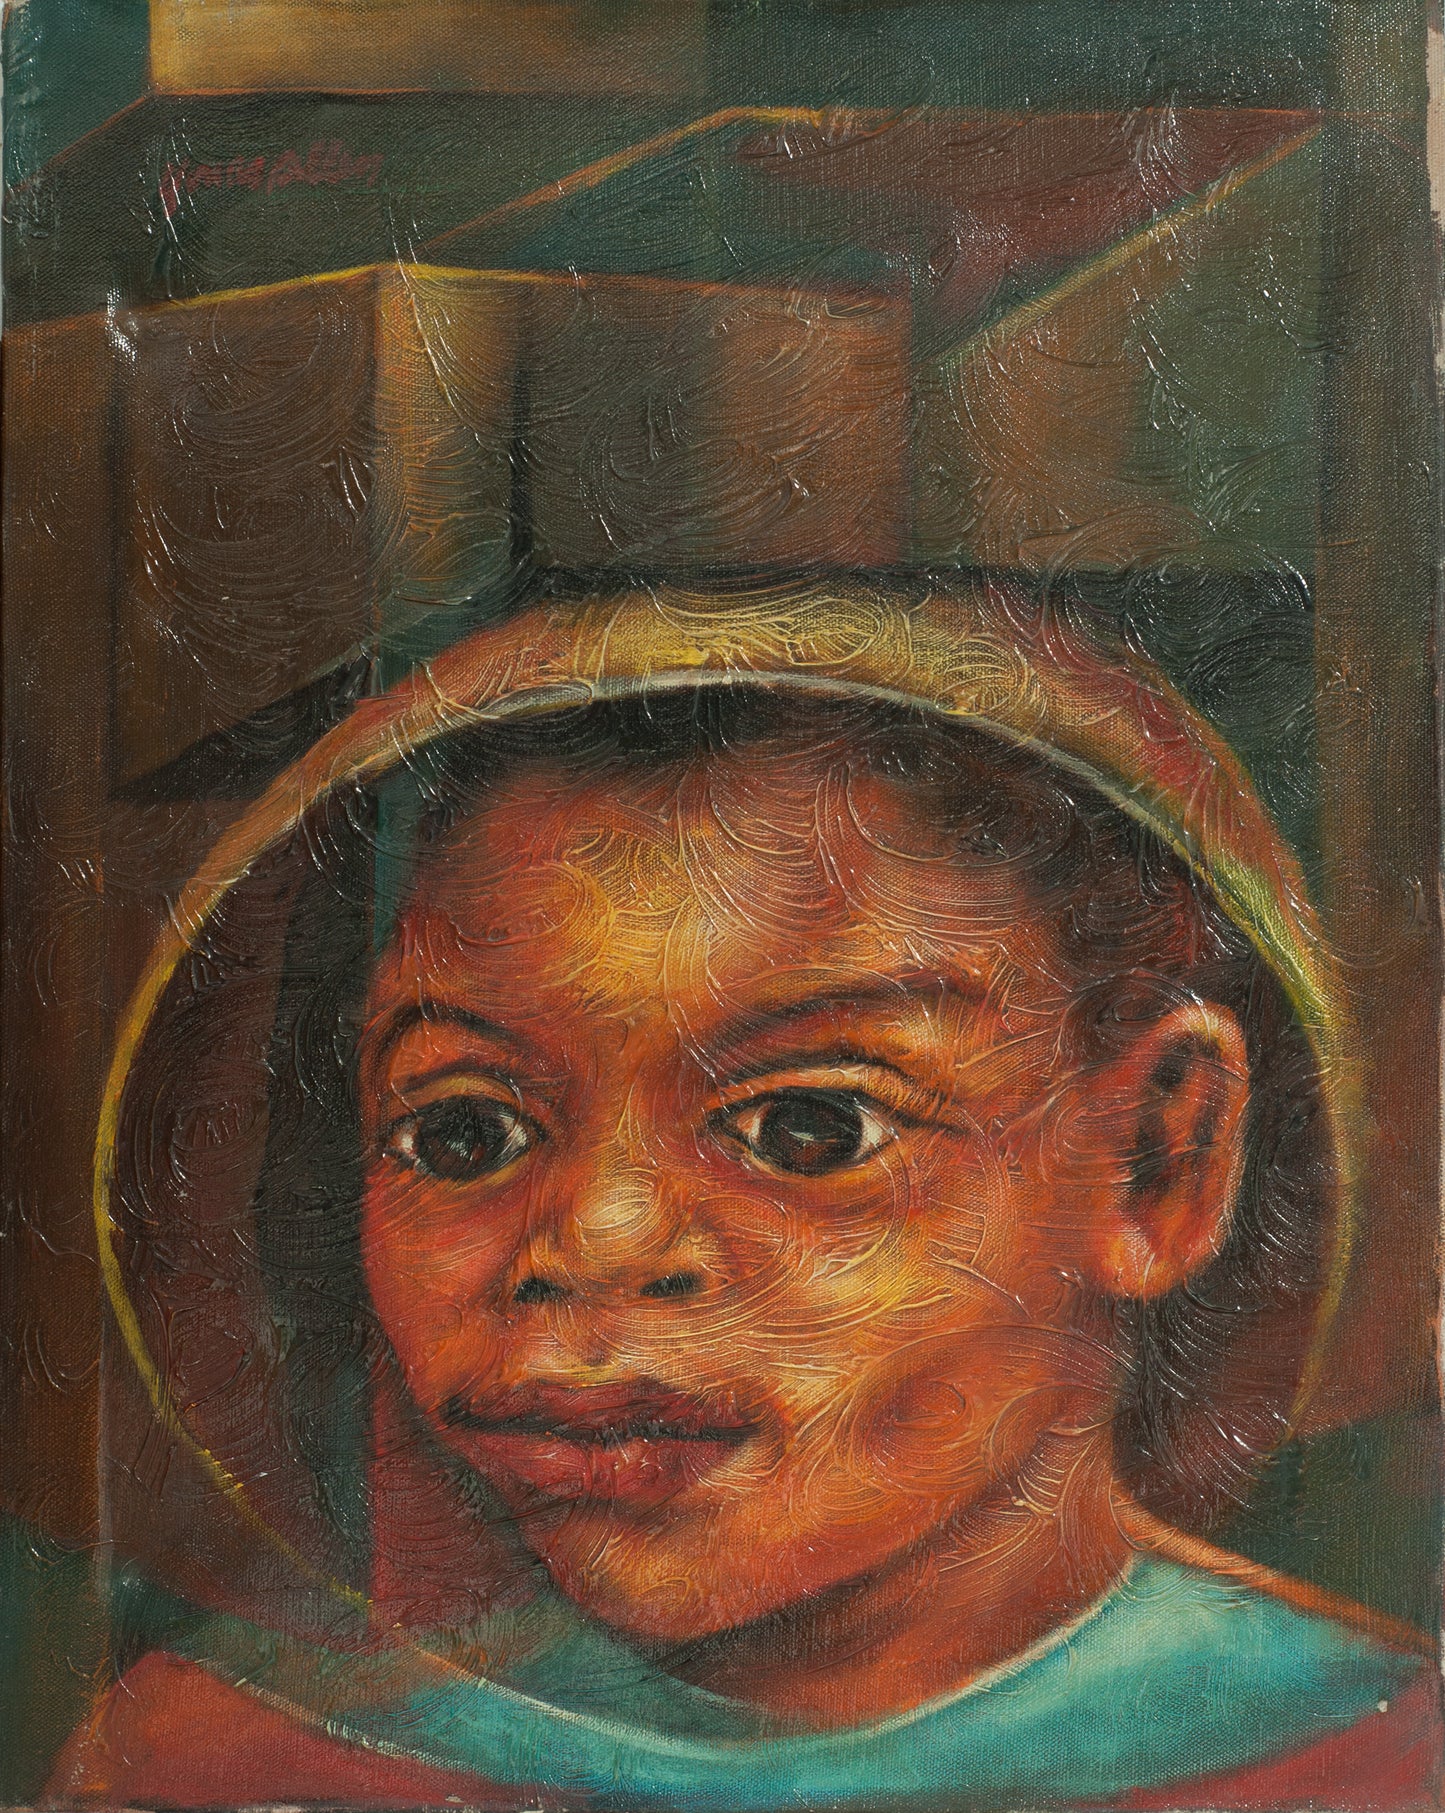 Jonas Allen 20"x16" Young Boy 1987 Oil on Canvas Unframed Painting #3-3-96GSN-Fondation Marie & Georges S. Nader